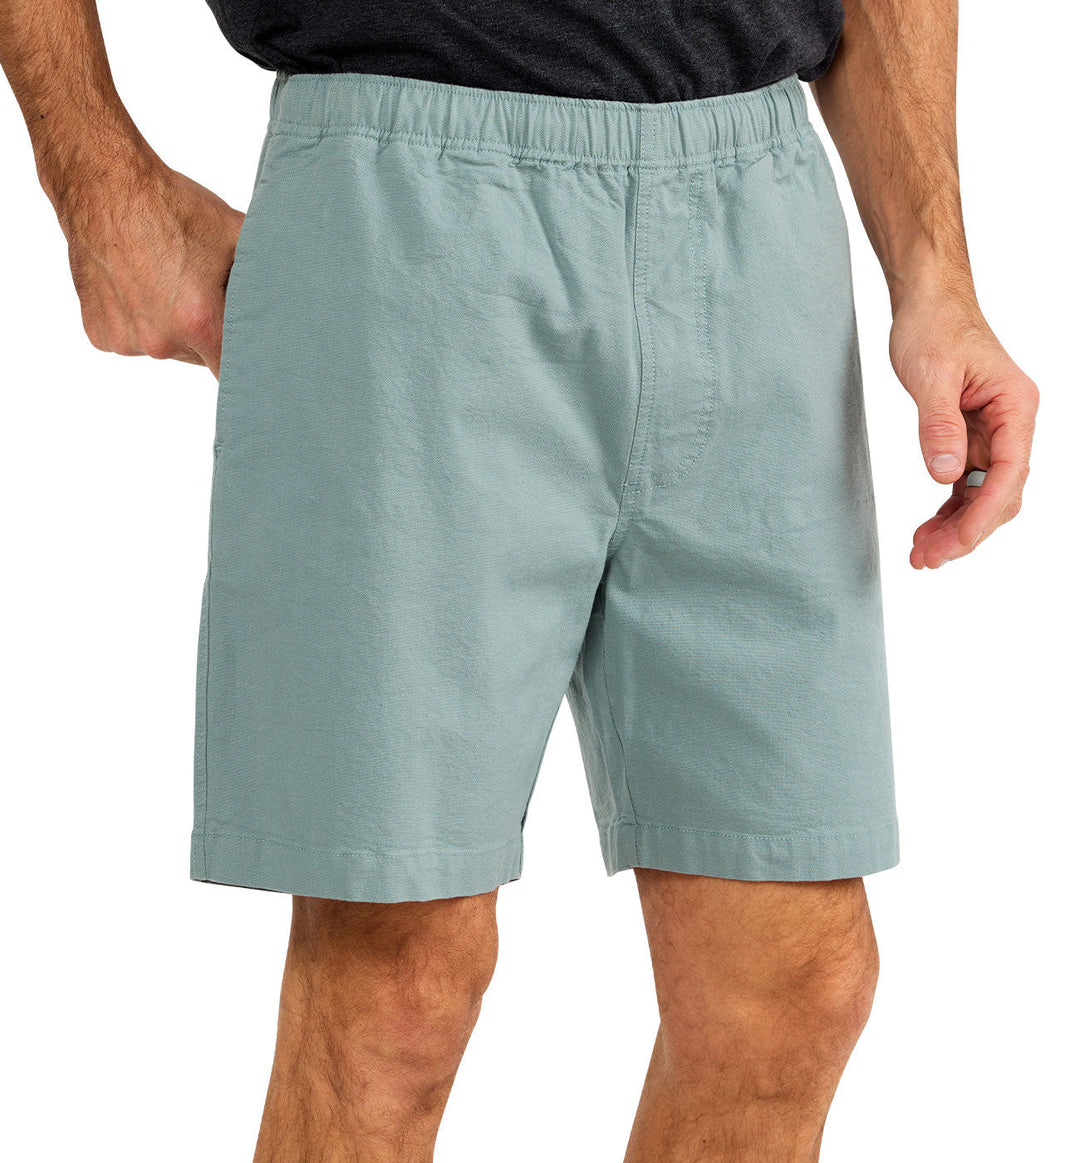 Free Fly Men's Stretch Canvas Short – 7" Shale Green MCVSH7